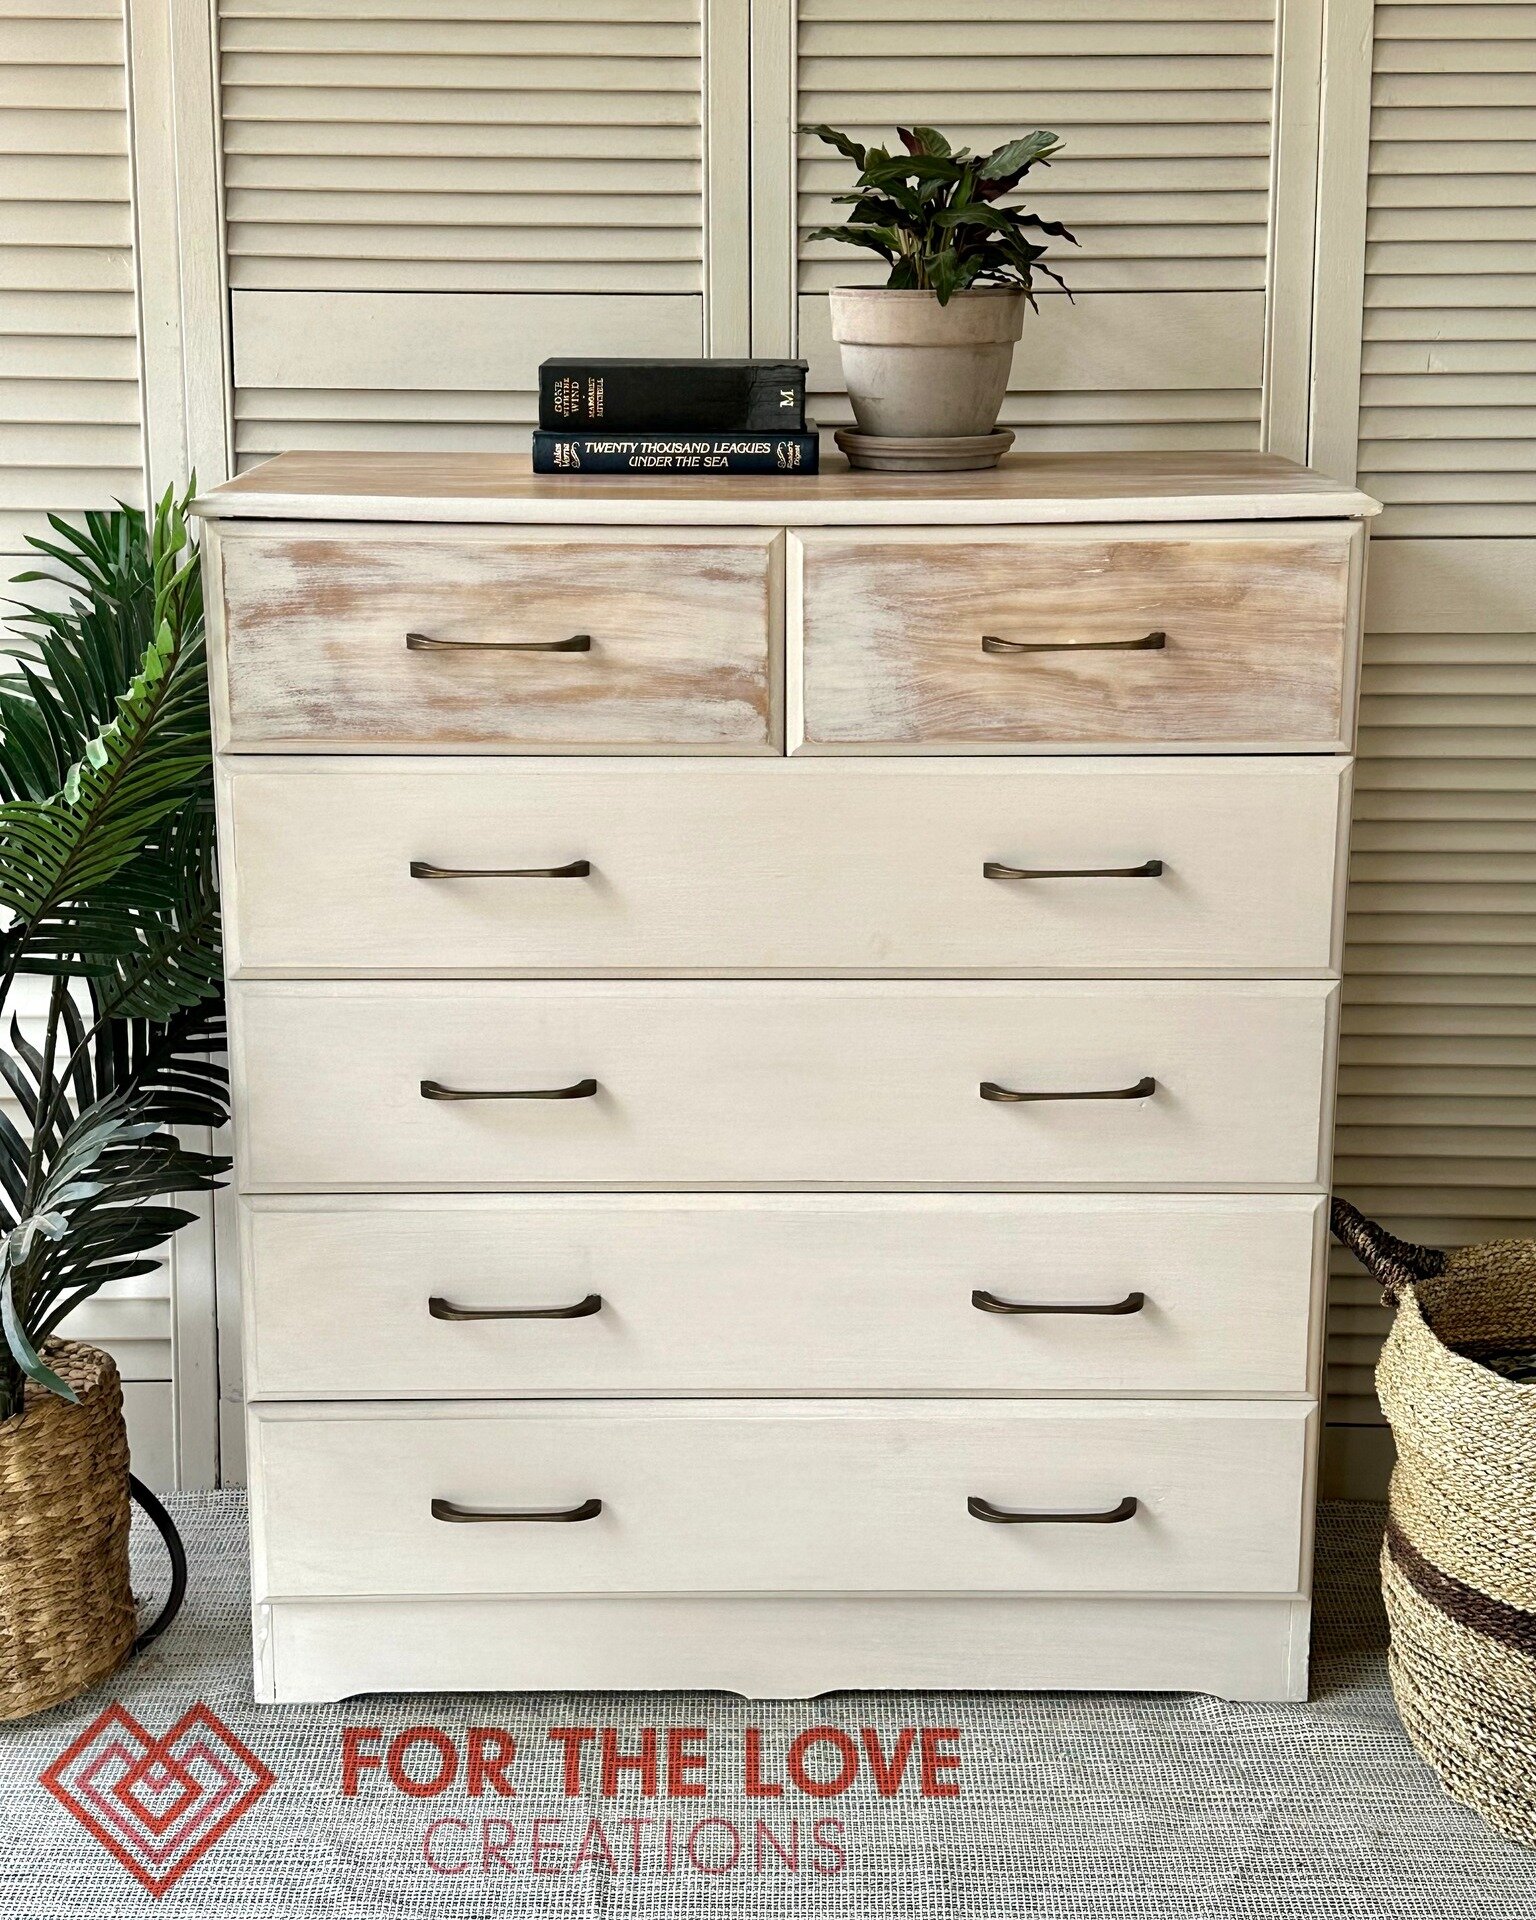 Katie from @forthelovecreations refinished this stunning dresser. The dresser top and the top two drawer fronts were 'washed' with Marzipan, with full coverage Marzipan on the rest. Katie sealed with MilkWax&trade; Clear and White.

Shop or find a re